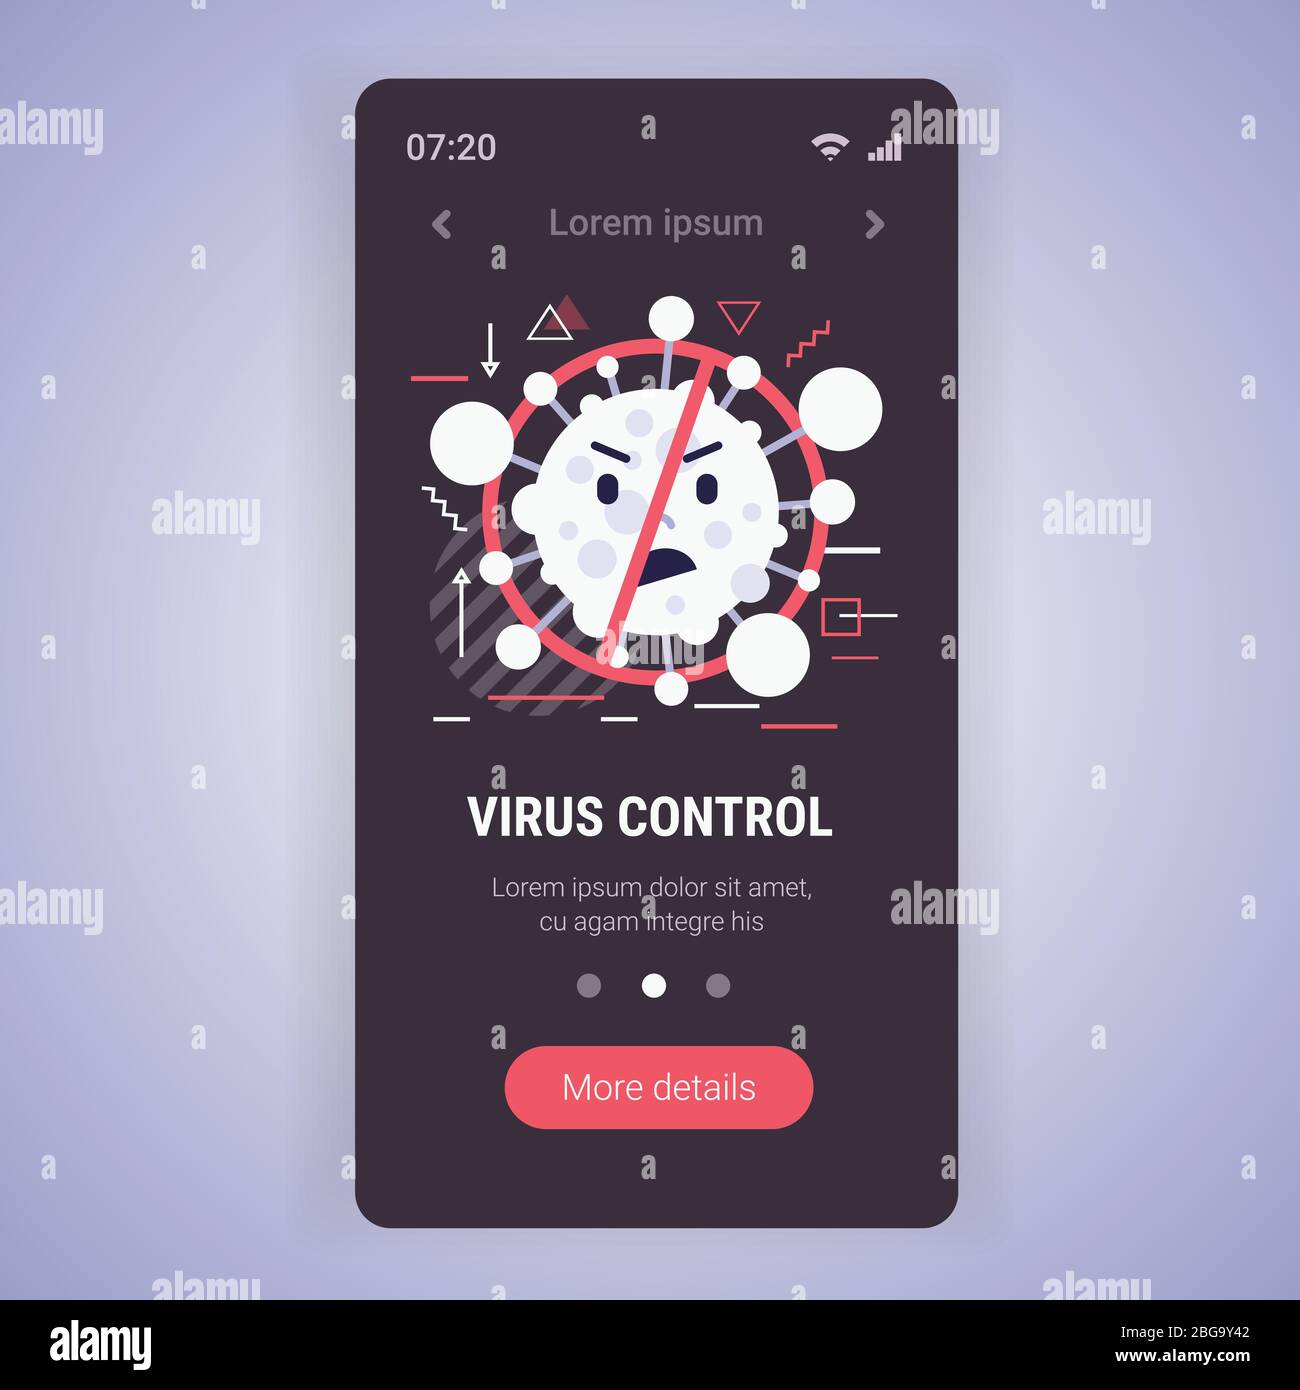 stop coronavirus concept noel 2019-nCoV virus cell with prohibit sign covid-19 prevention poster smartphone screen mobile app copy space vector illustration Stock Vector